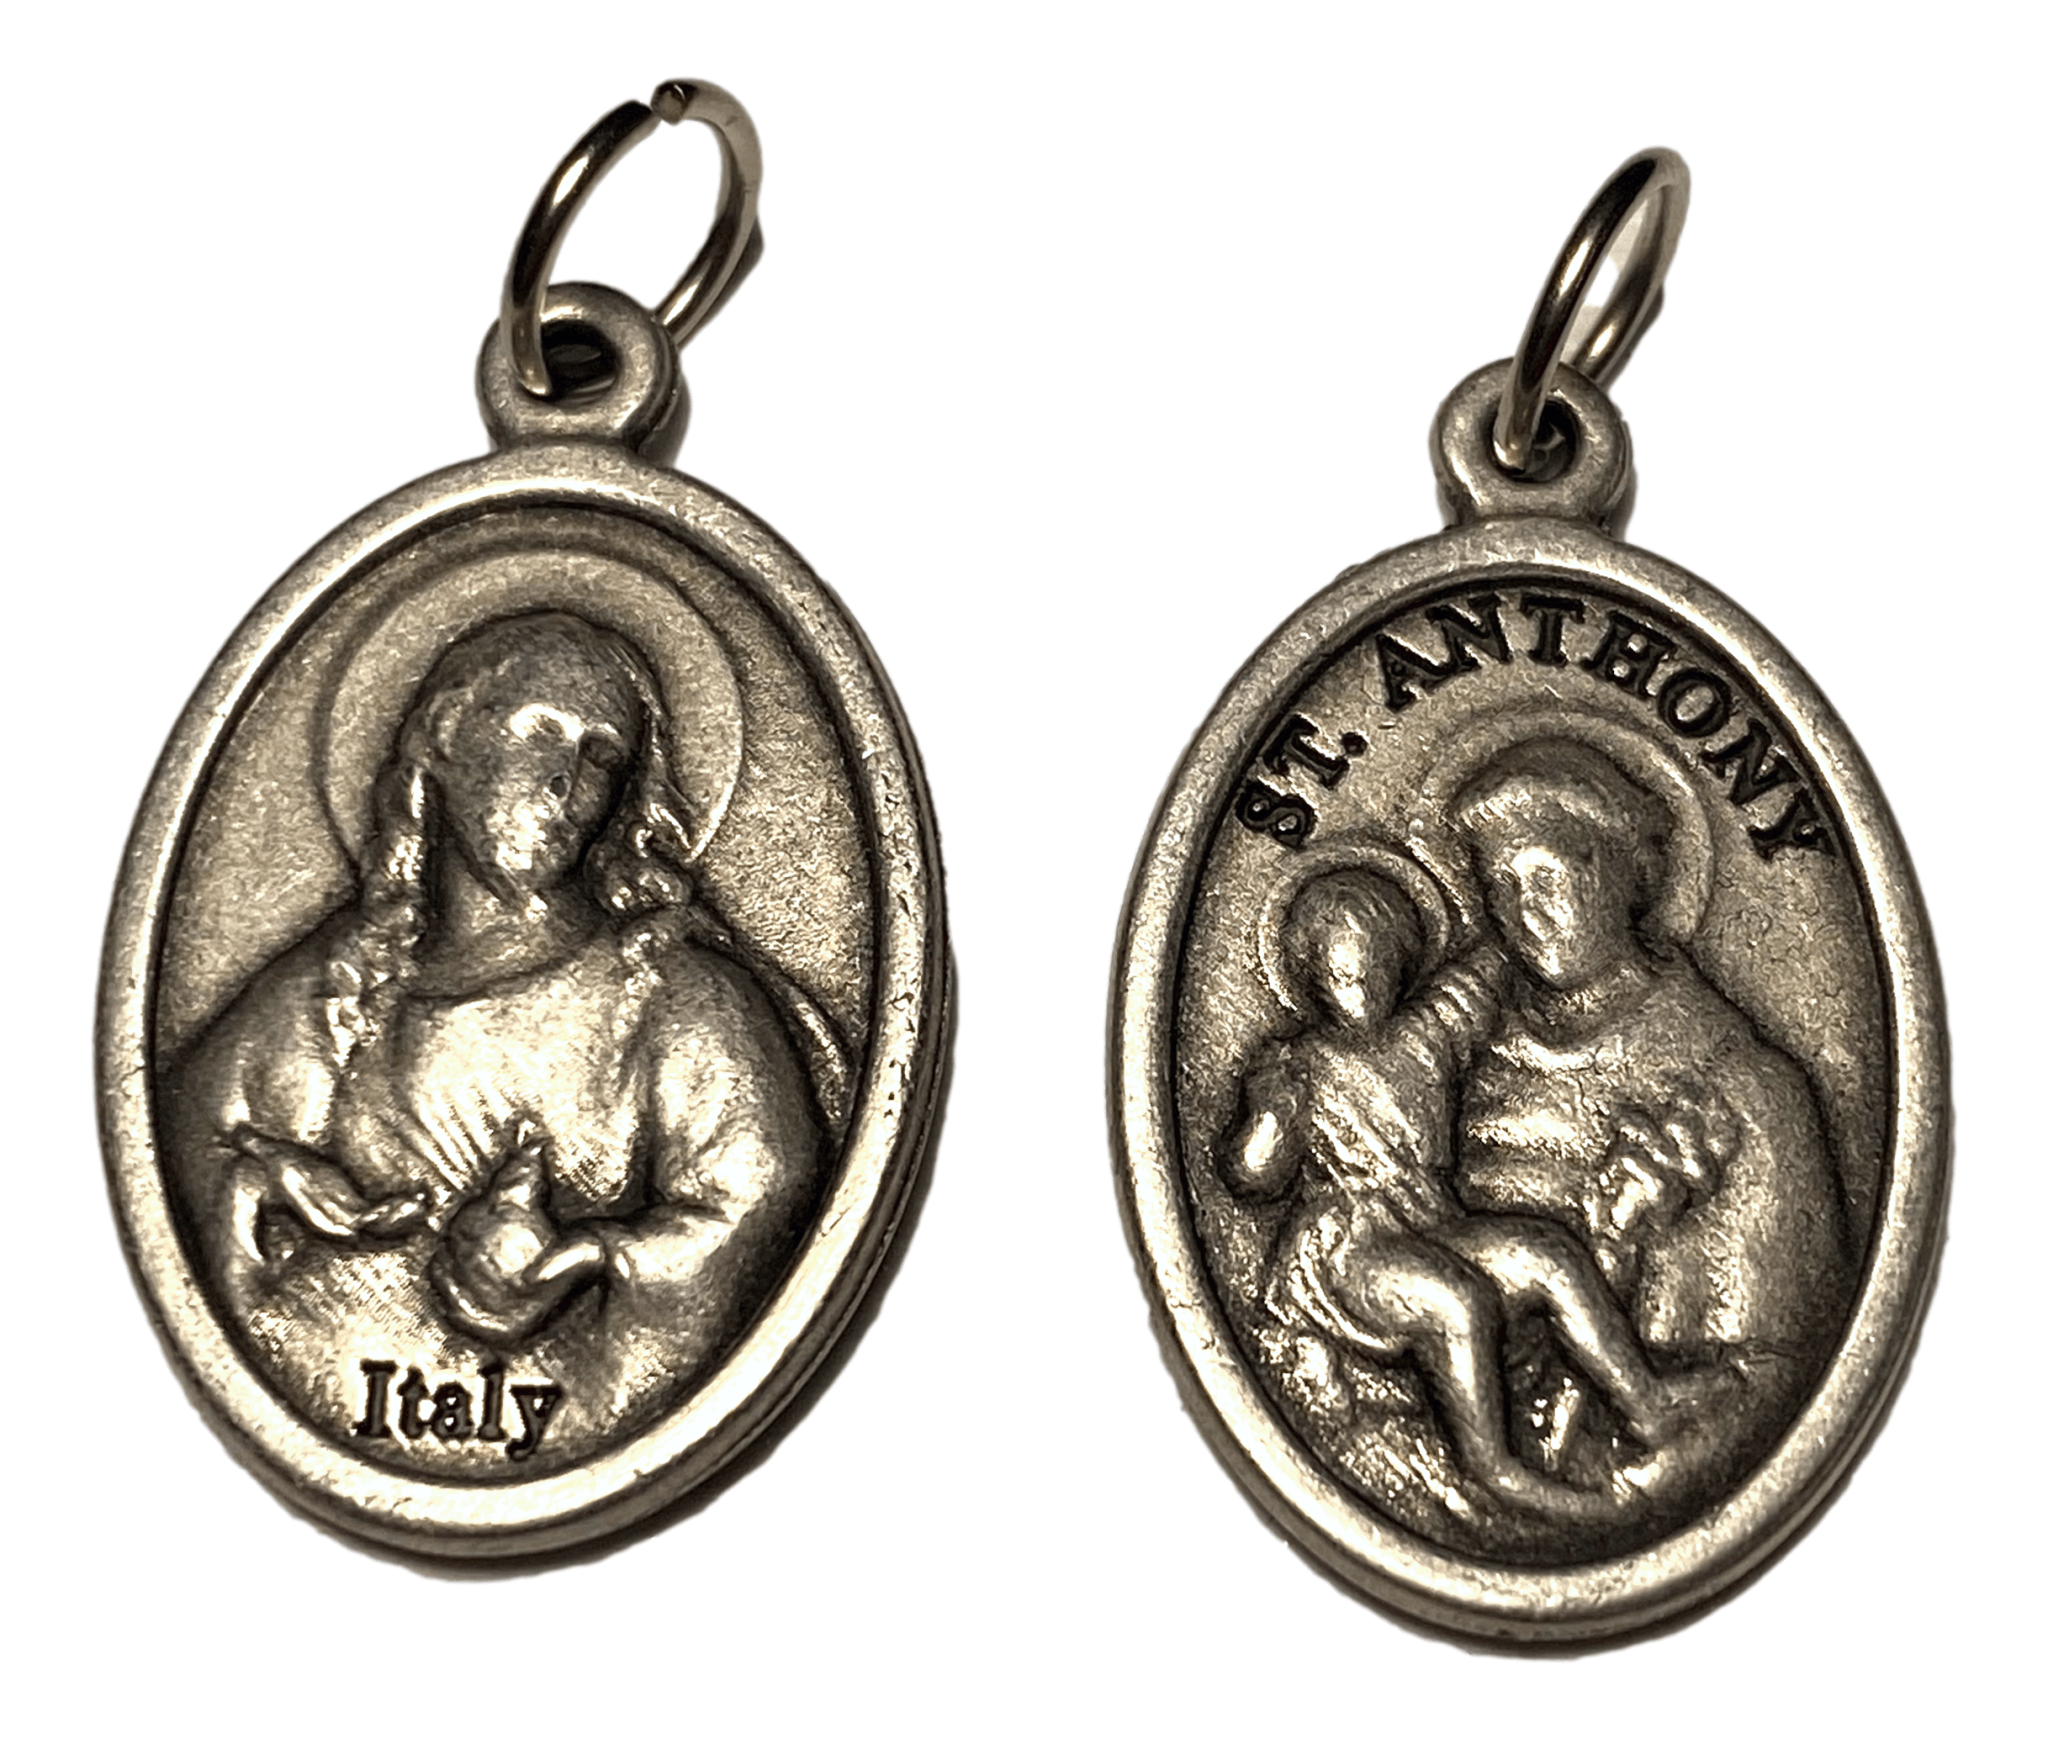 Medal Oval Saint Anthony Sacred Heart of Jesus Italian Double-Sided Silver Metal Alloy 1 L x 5/8 W inches - Ysleta Mission Gift Shop- VOTED El Paso's Best Gift Shop